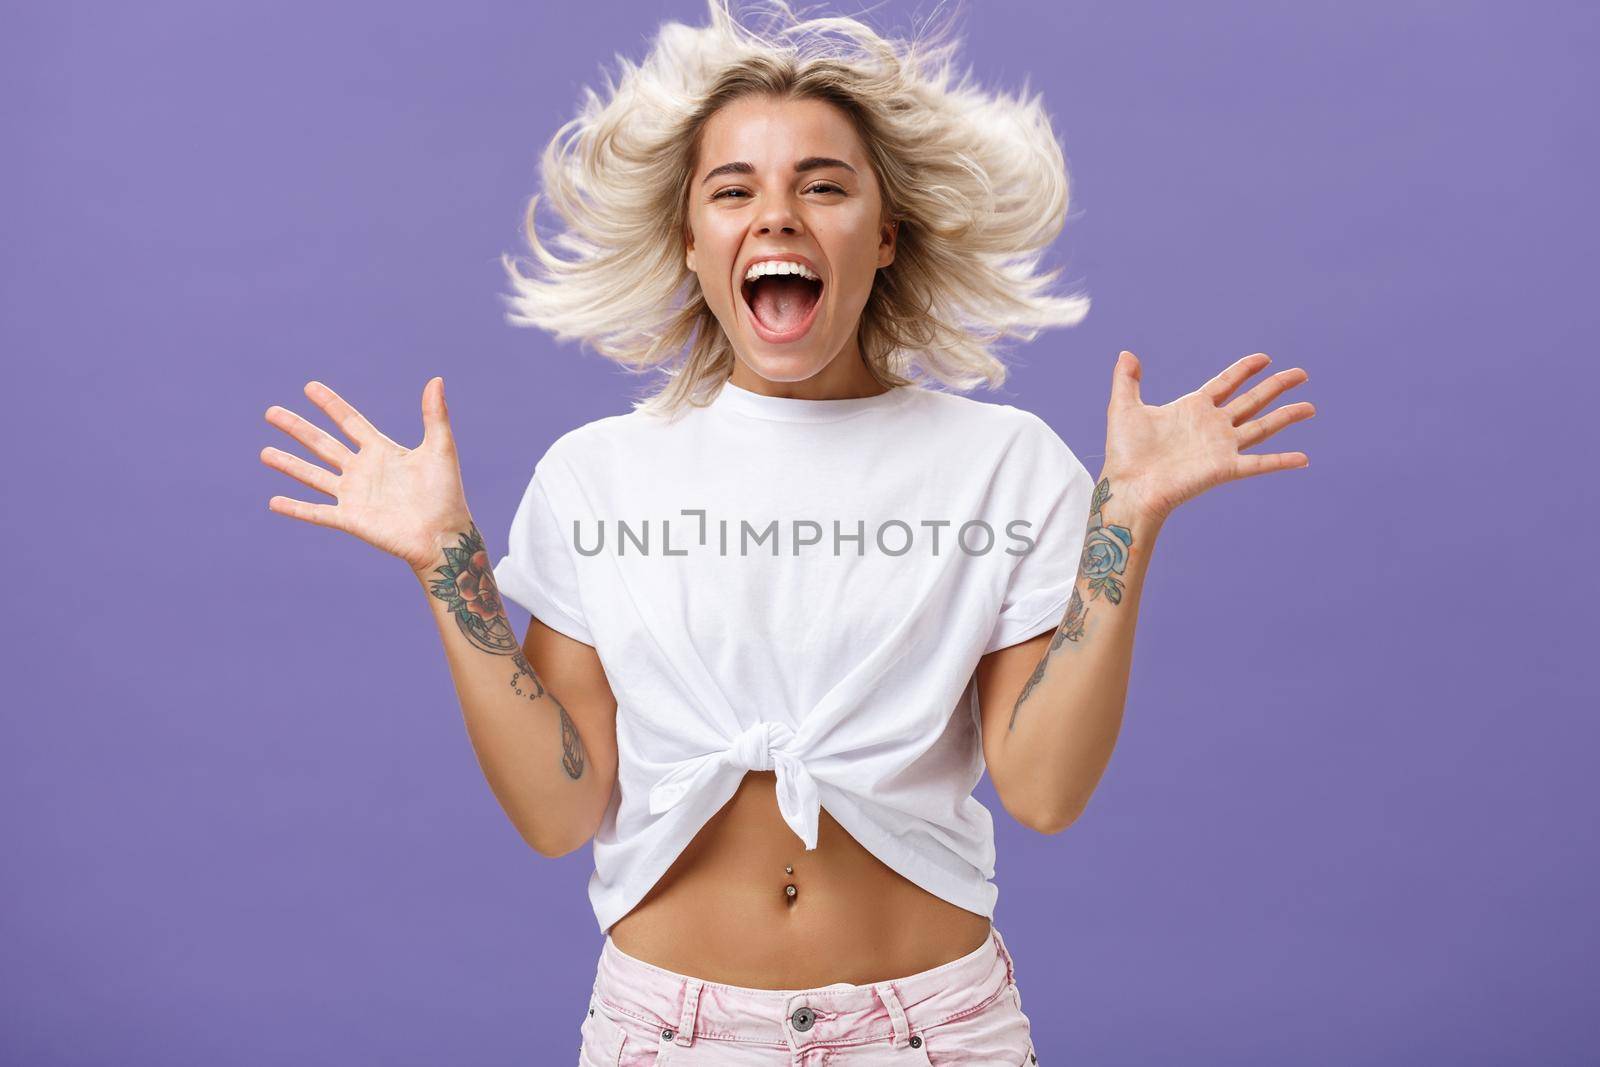 Lifestyle. Studio shot of happy carefree and pleased joyful woman with blonde hair spreading palms aside in delighted pose smiling broadly and gazing entertained at camera jumping while having fun.